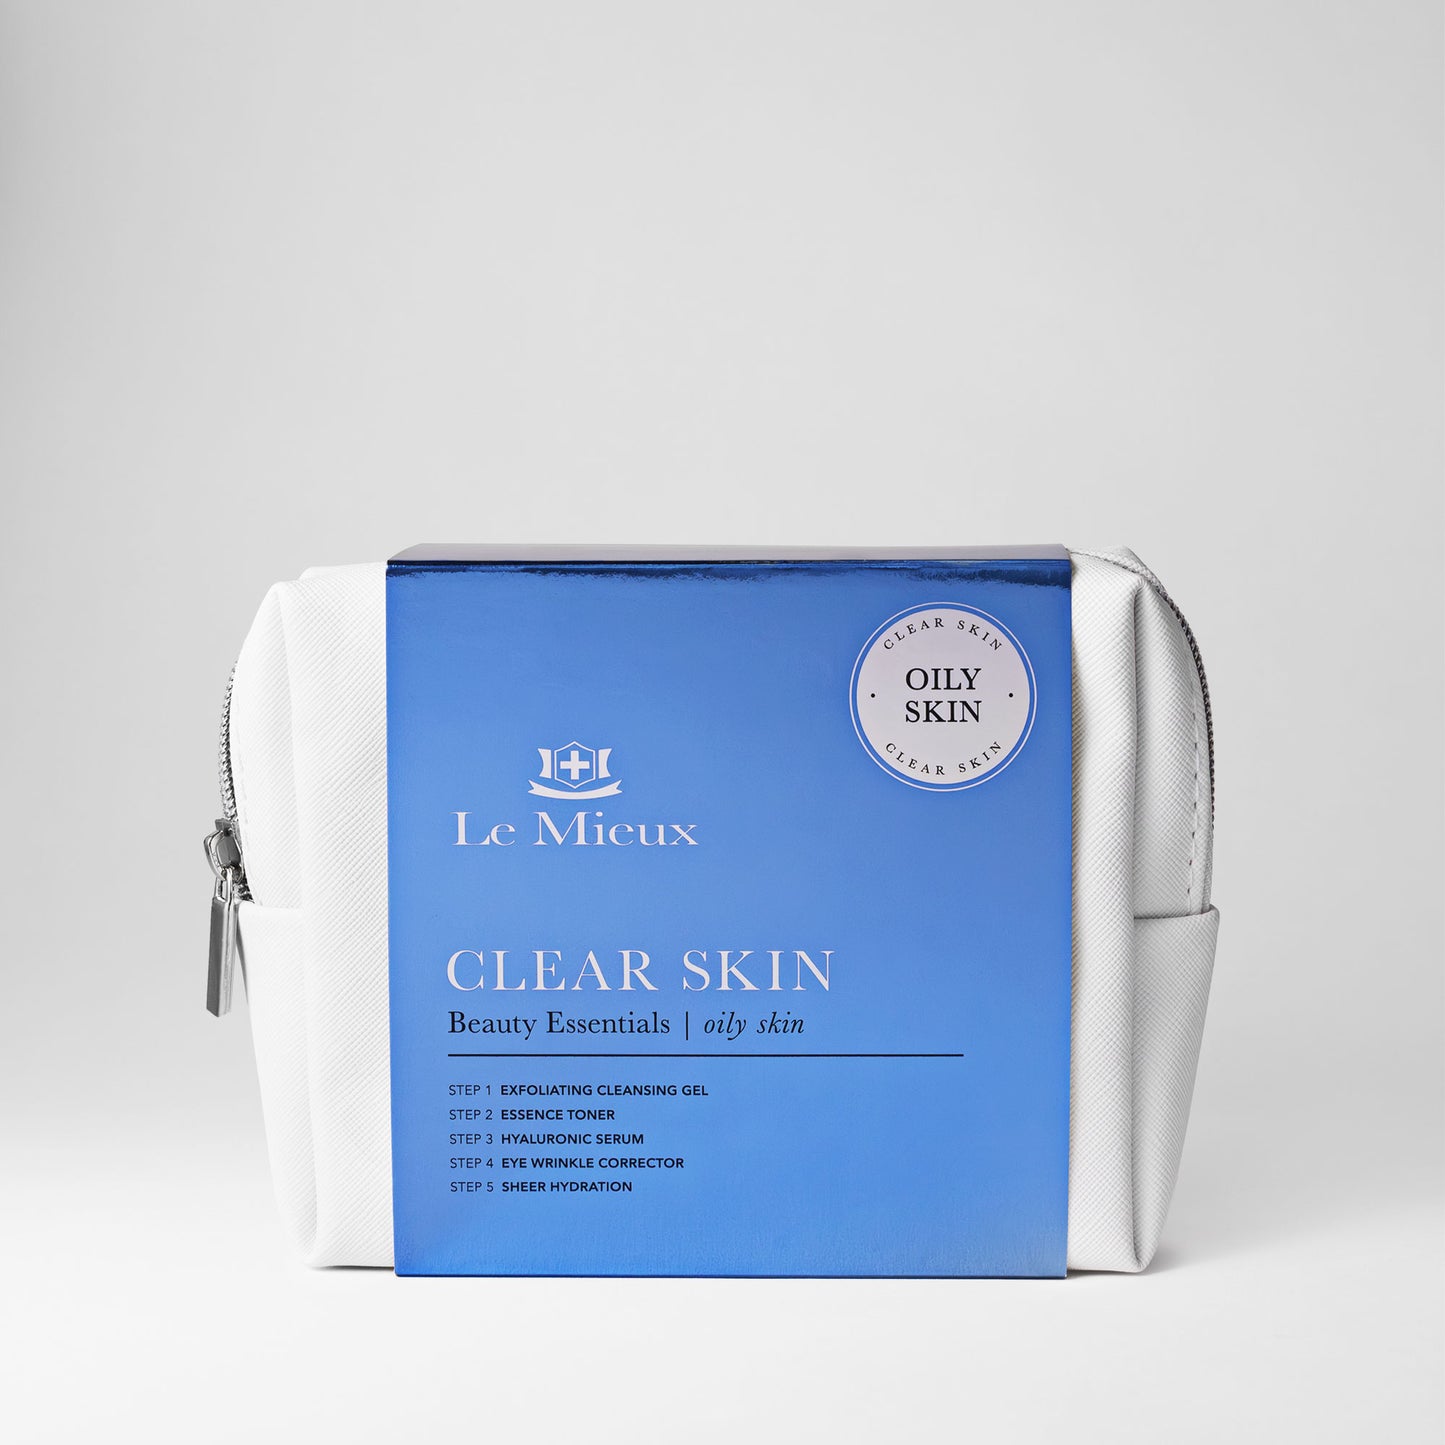 CLEAR SKIN BEAUTY ESSENTIALS